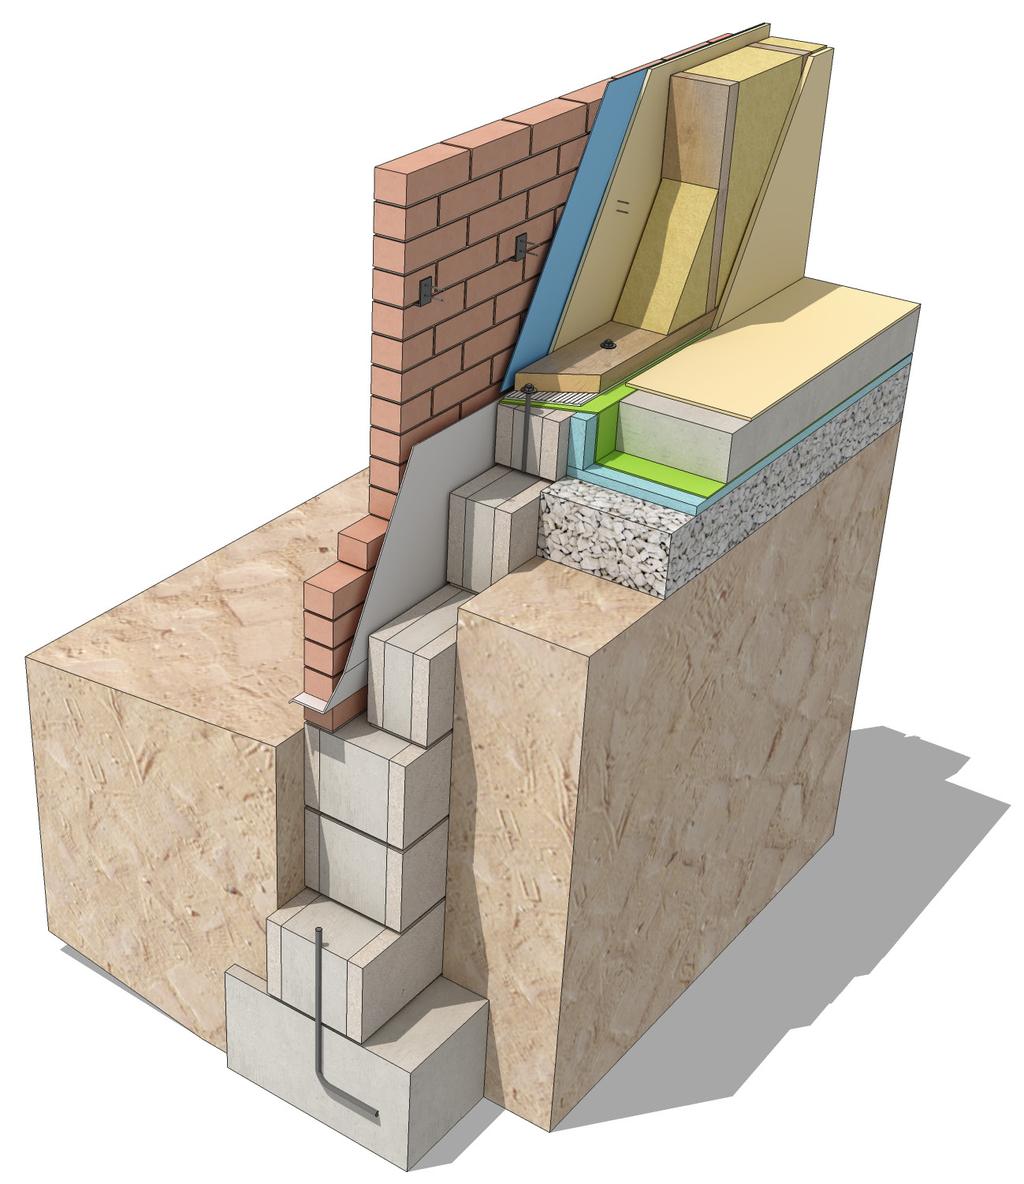 Minimum width of concrete footings (in.) Load-bearing value of soil (psf) 1,500 2,000 3,000 4,000 Conventional light frame construction 1-story 12 12 12 12 2-story 15 12 12 12 3-story 23 17 12 12 4in.